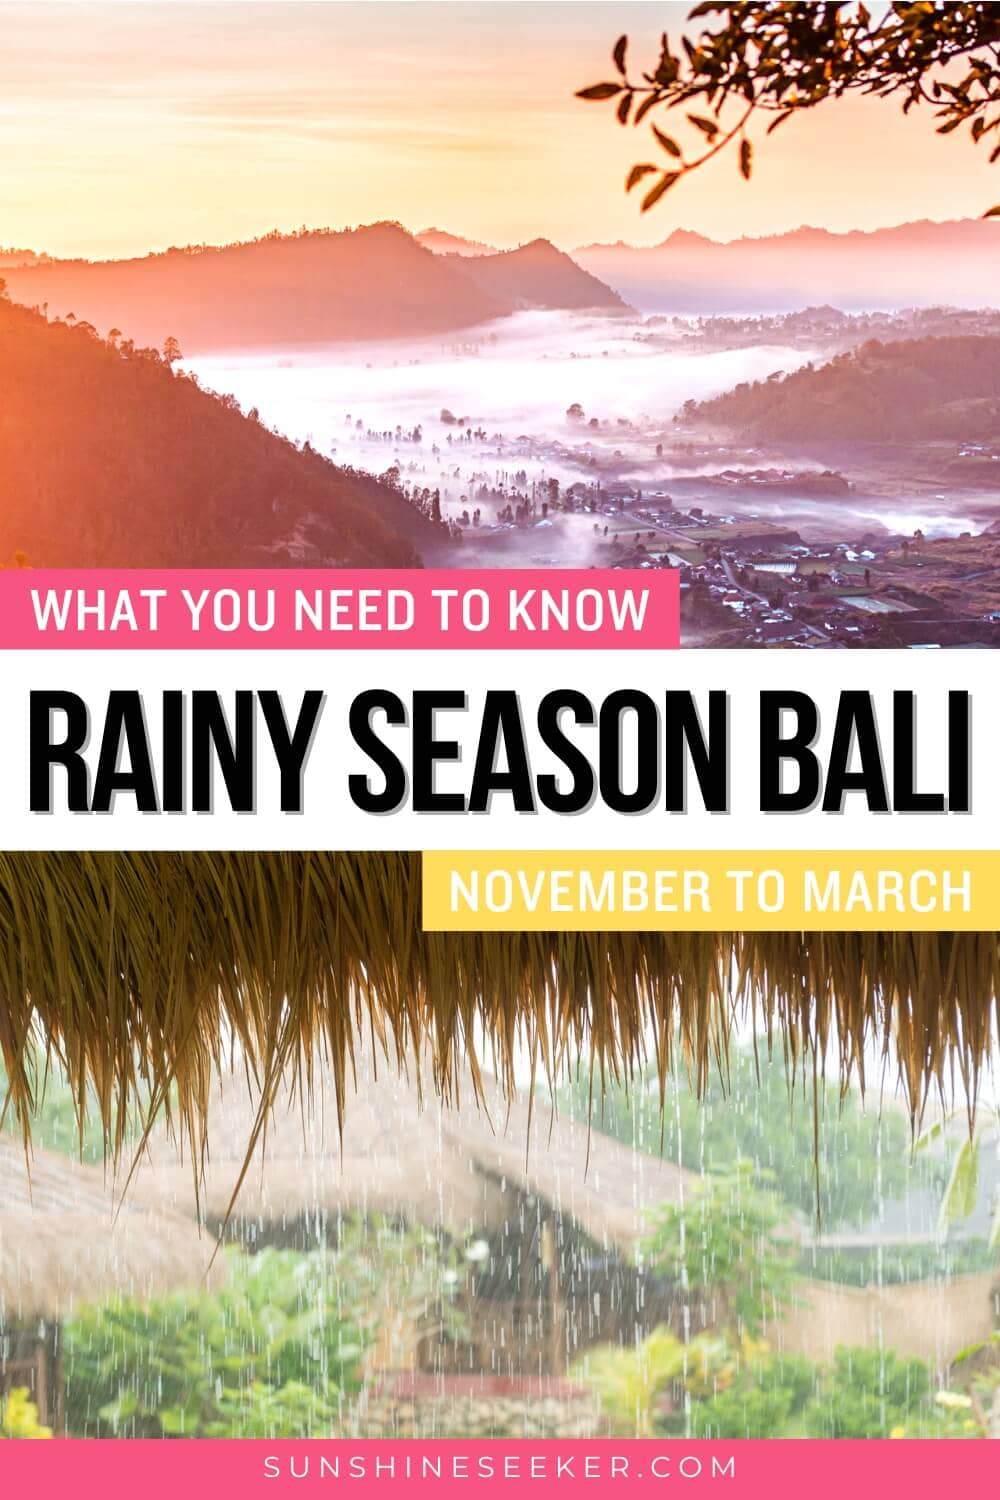 This is everything you need to know before visiting Bali during the rainy season. Where to stay, top things to do while it's raining and which months gets the most rain during the rainy season in Bali.